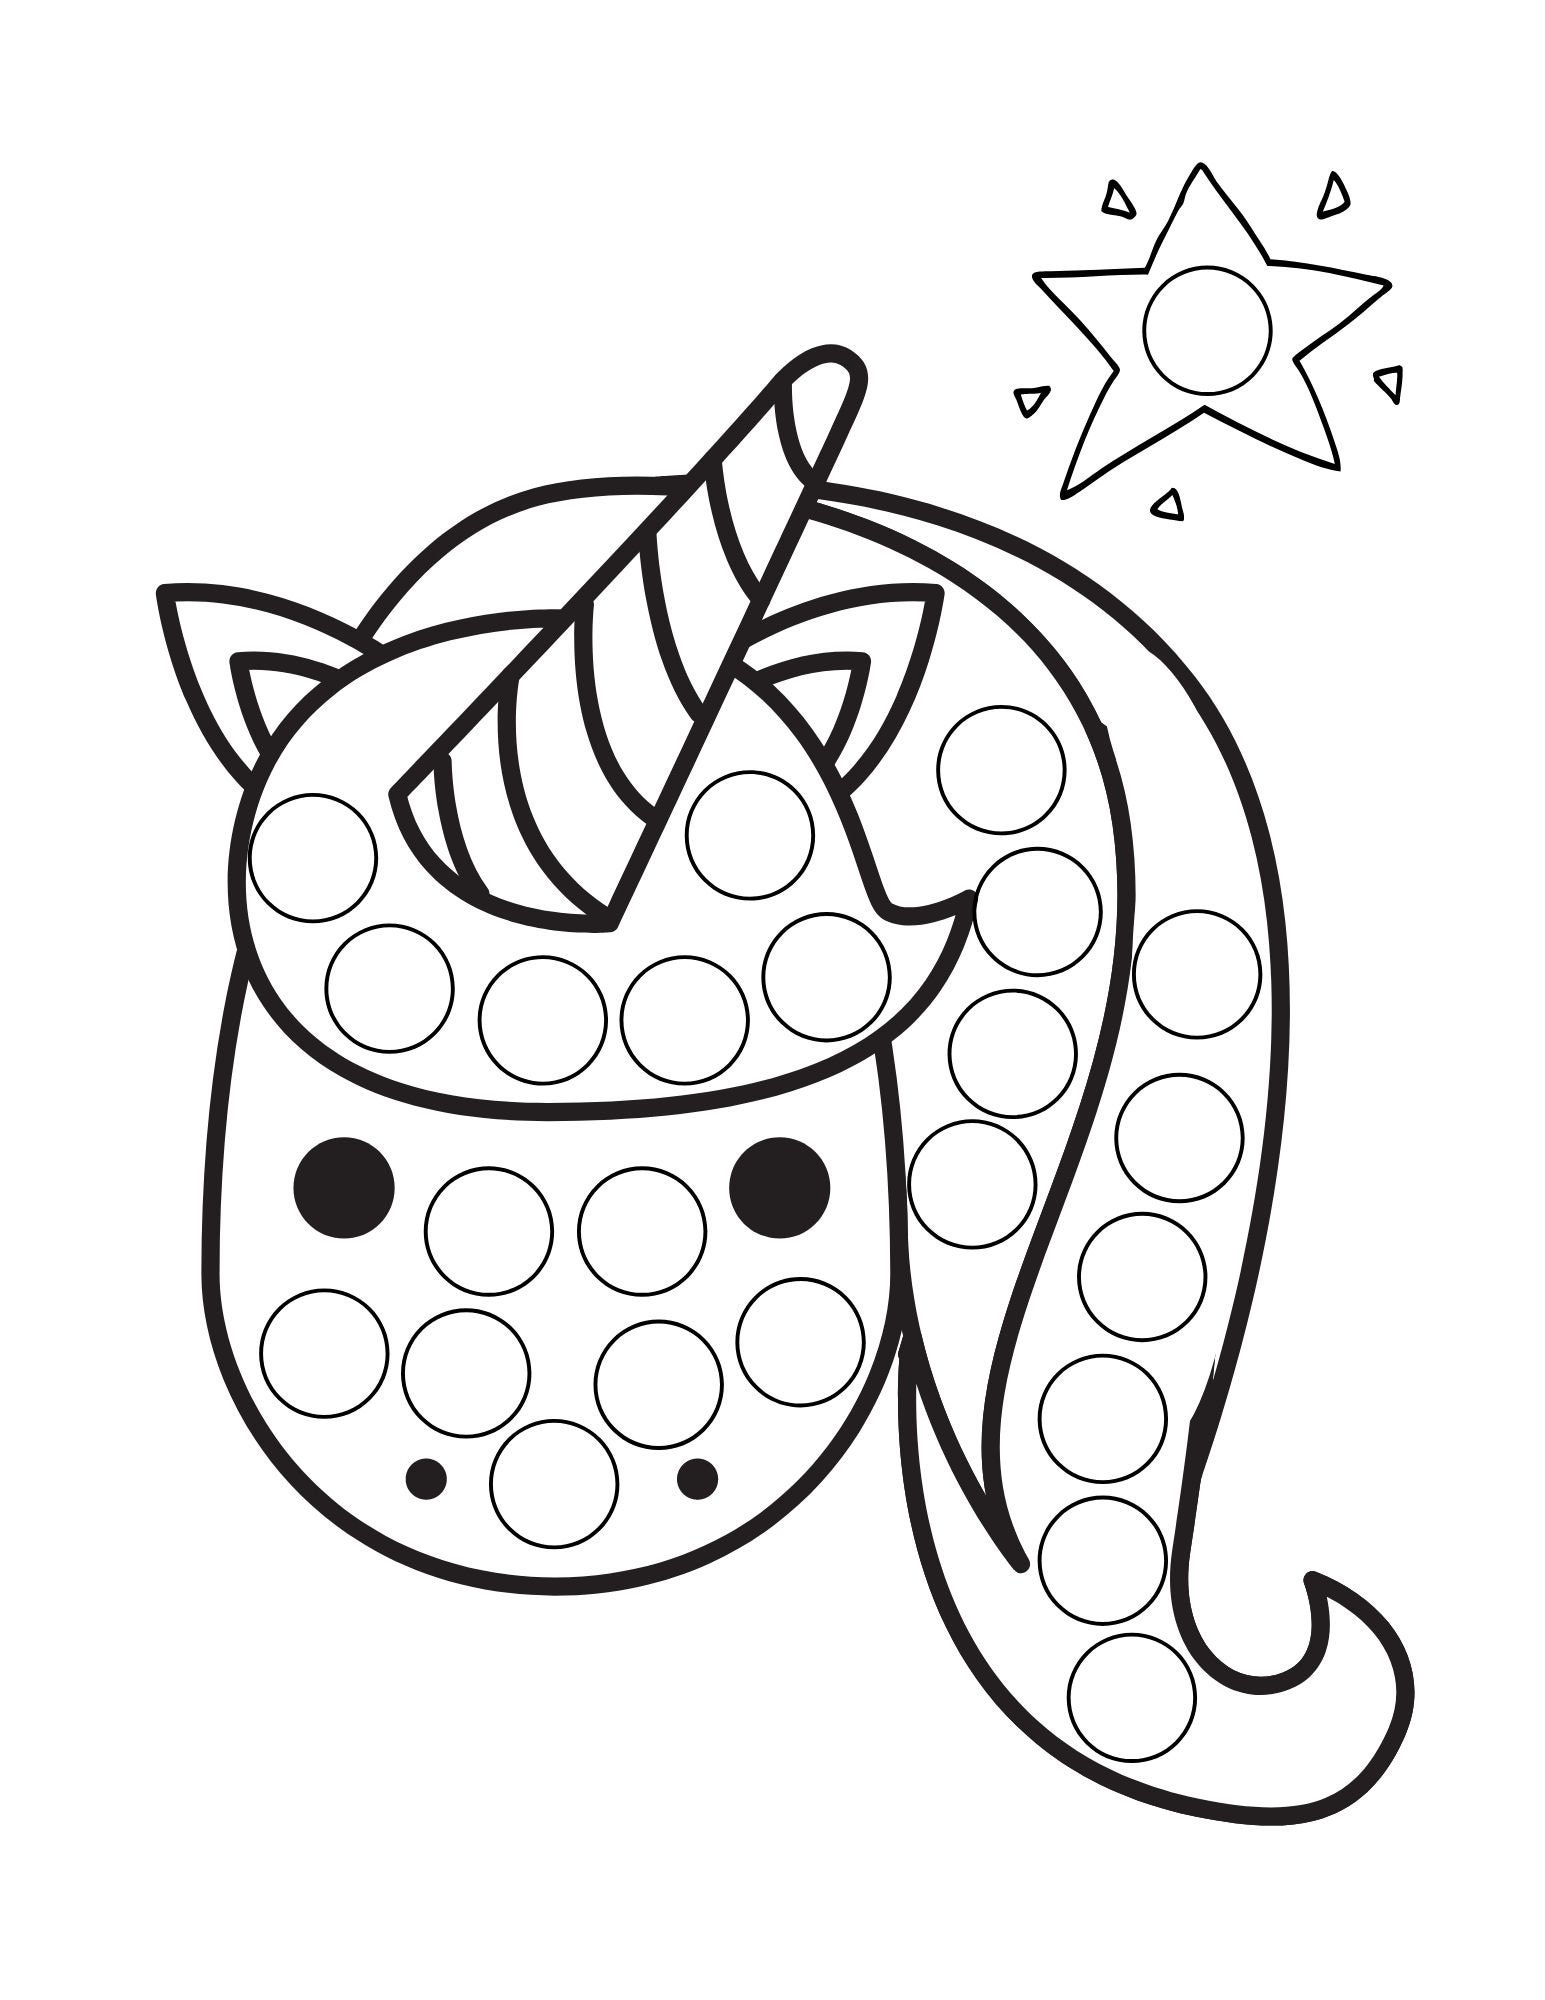 Unicorn Dot Marker Coloring Pages 18 Printable PDF Coloring   Etsy